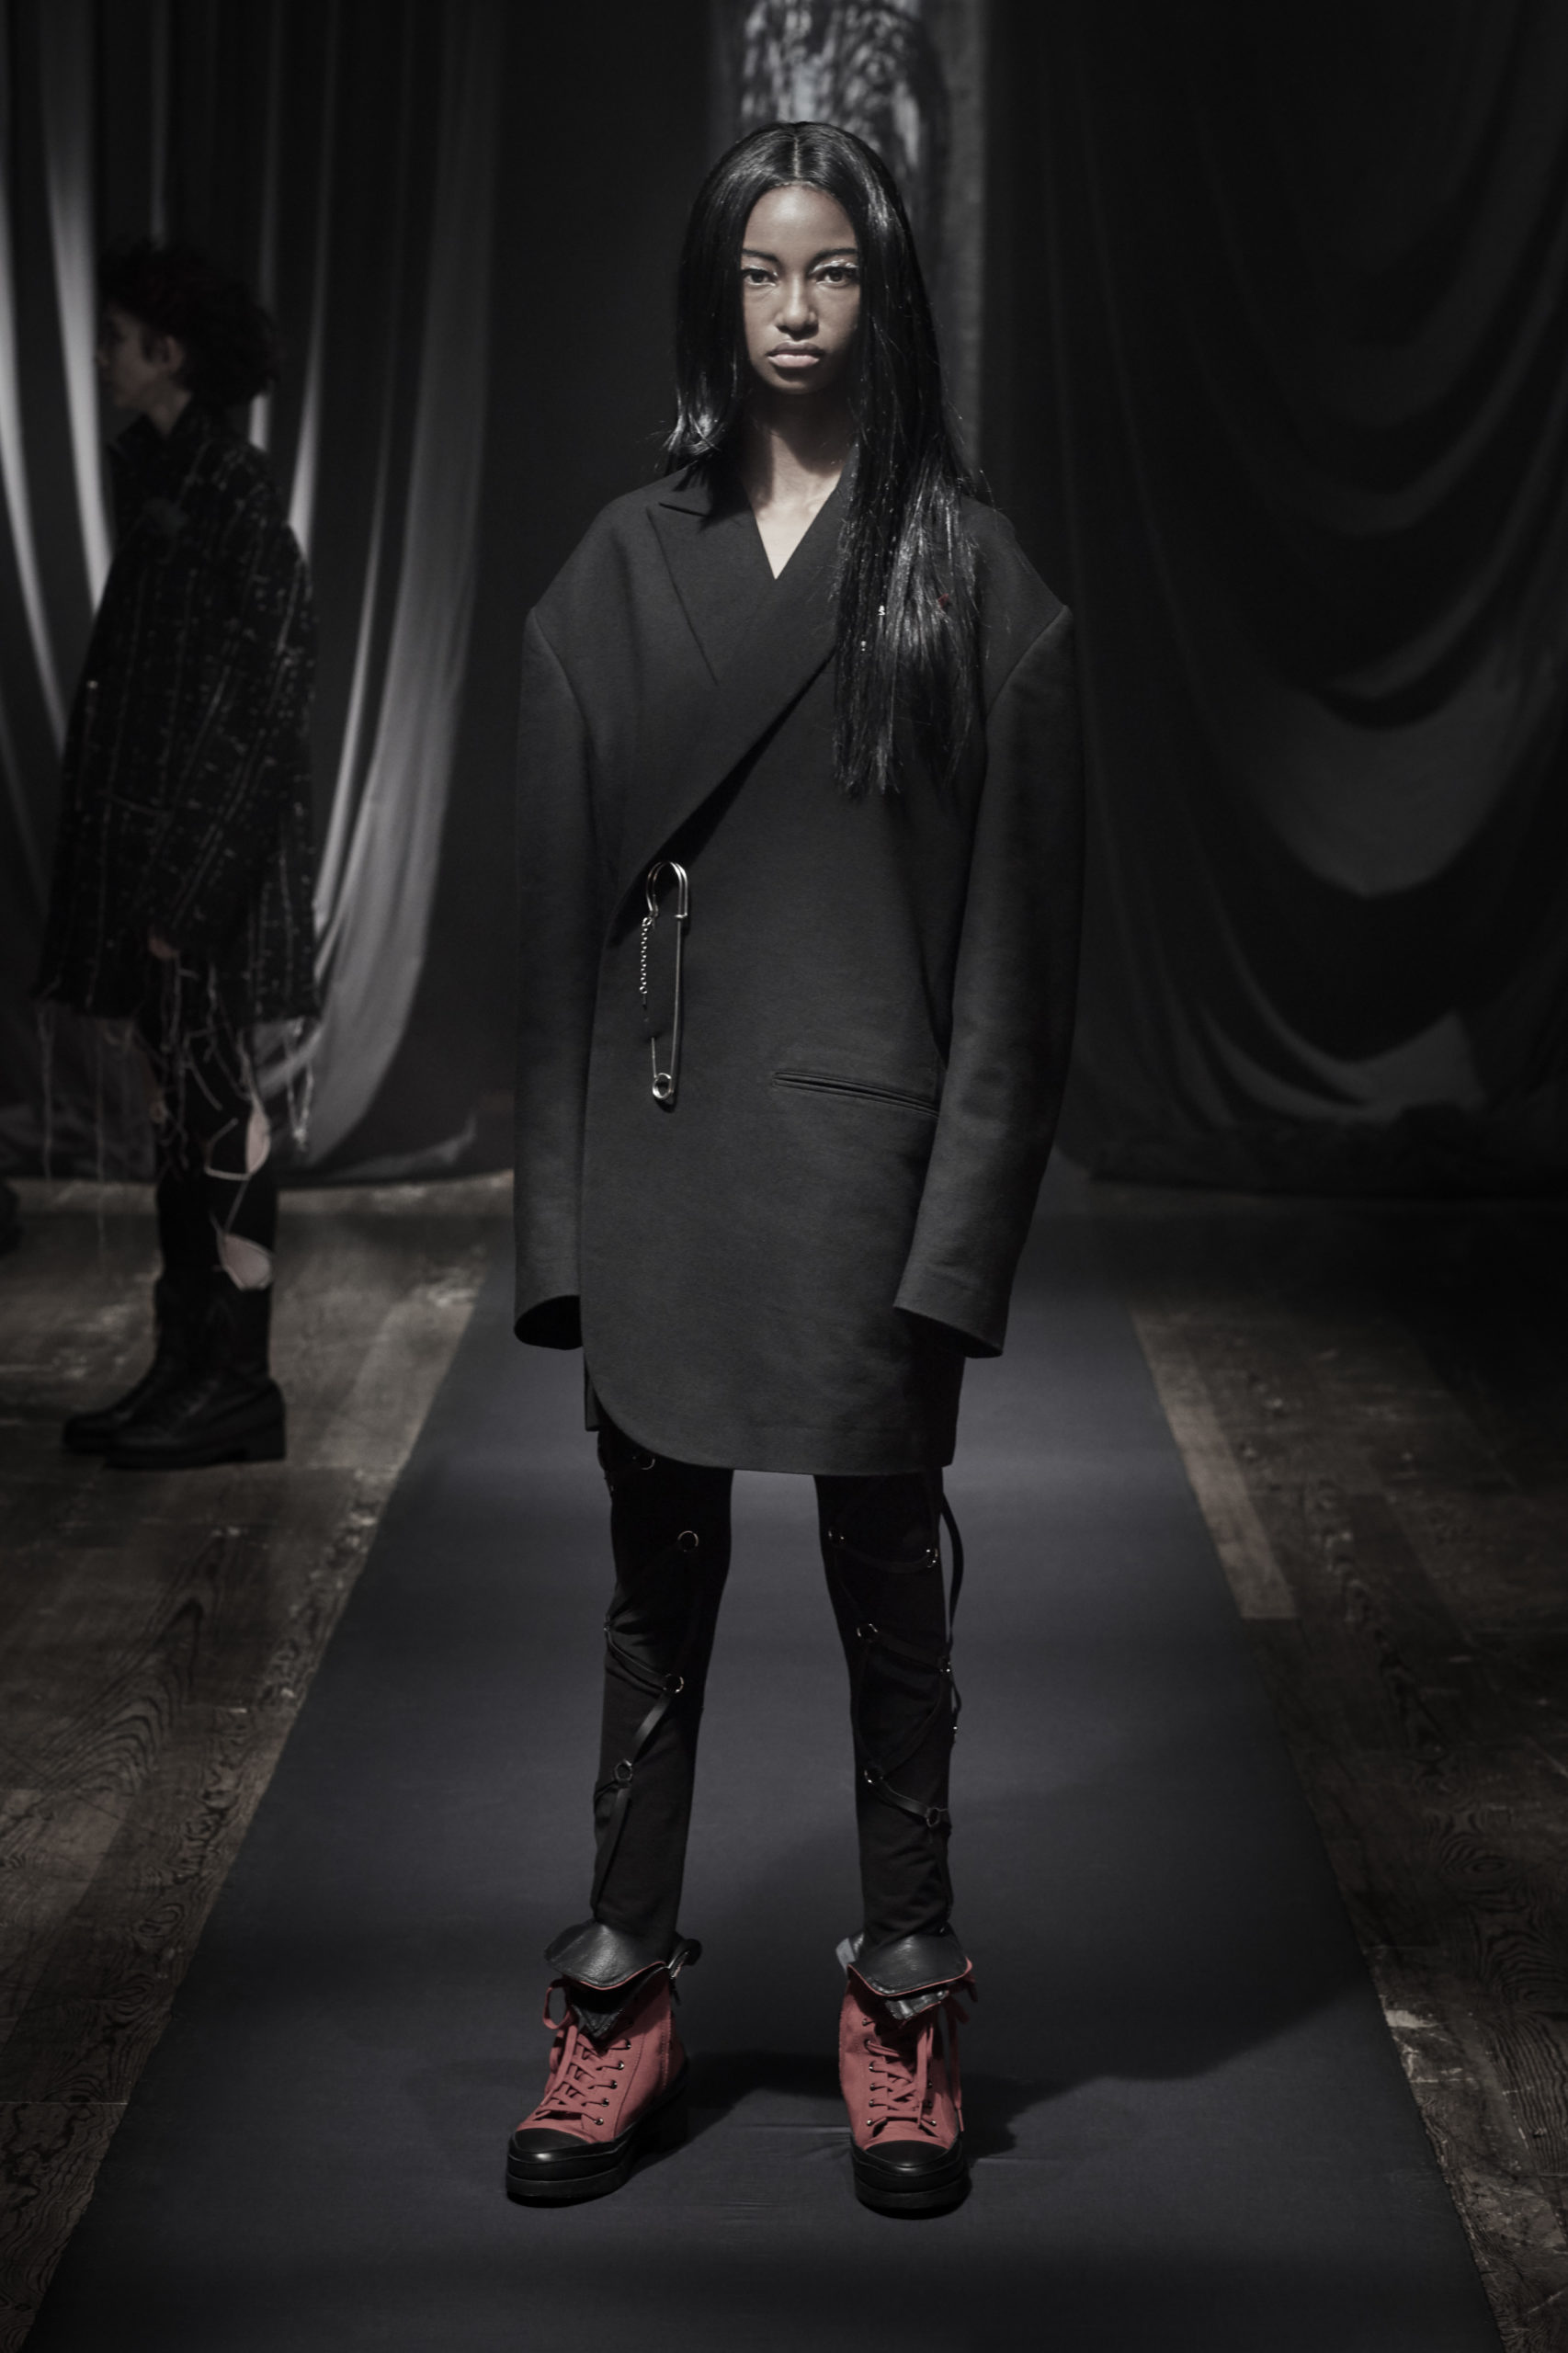 Yohji Yamamoto Stays True to his Goth Roots in Latest Video